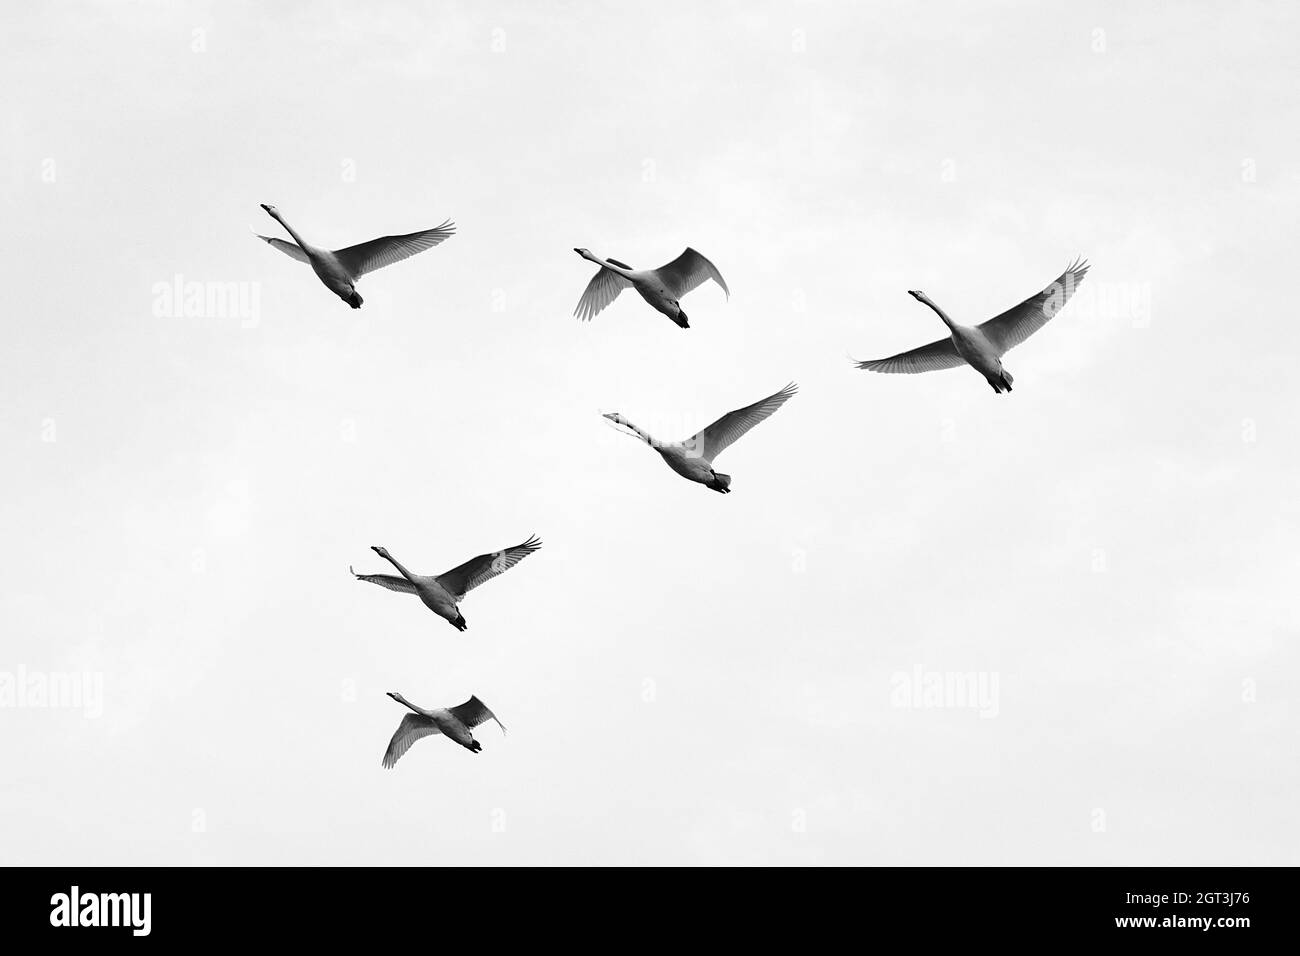 Low Angle View Of Seagulls Flying Stock Photo